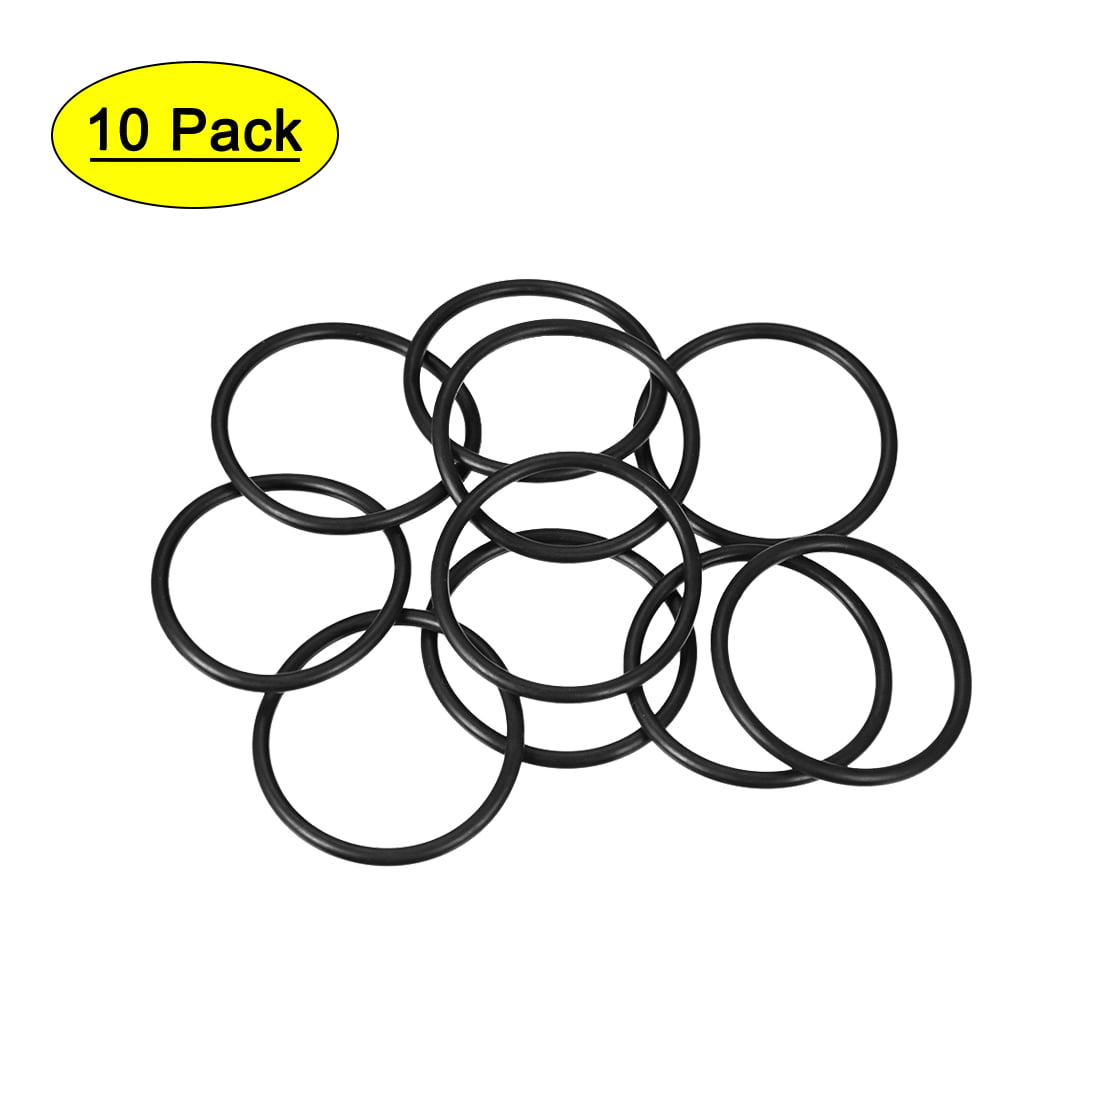 uxcell 10 Pcs Mechanical Black Rubber O Ring Oil Seal Gaskets 36mm x 30mm